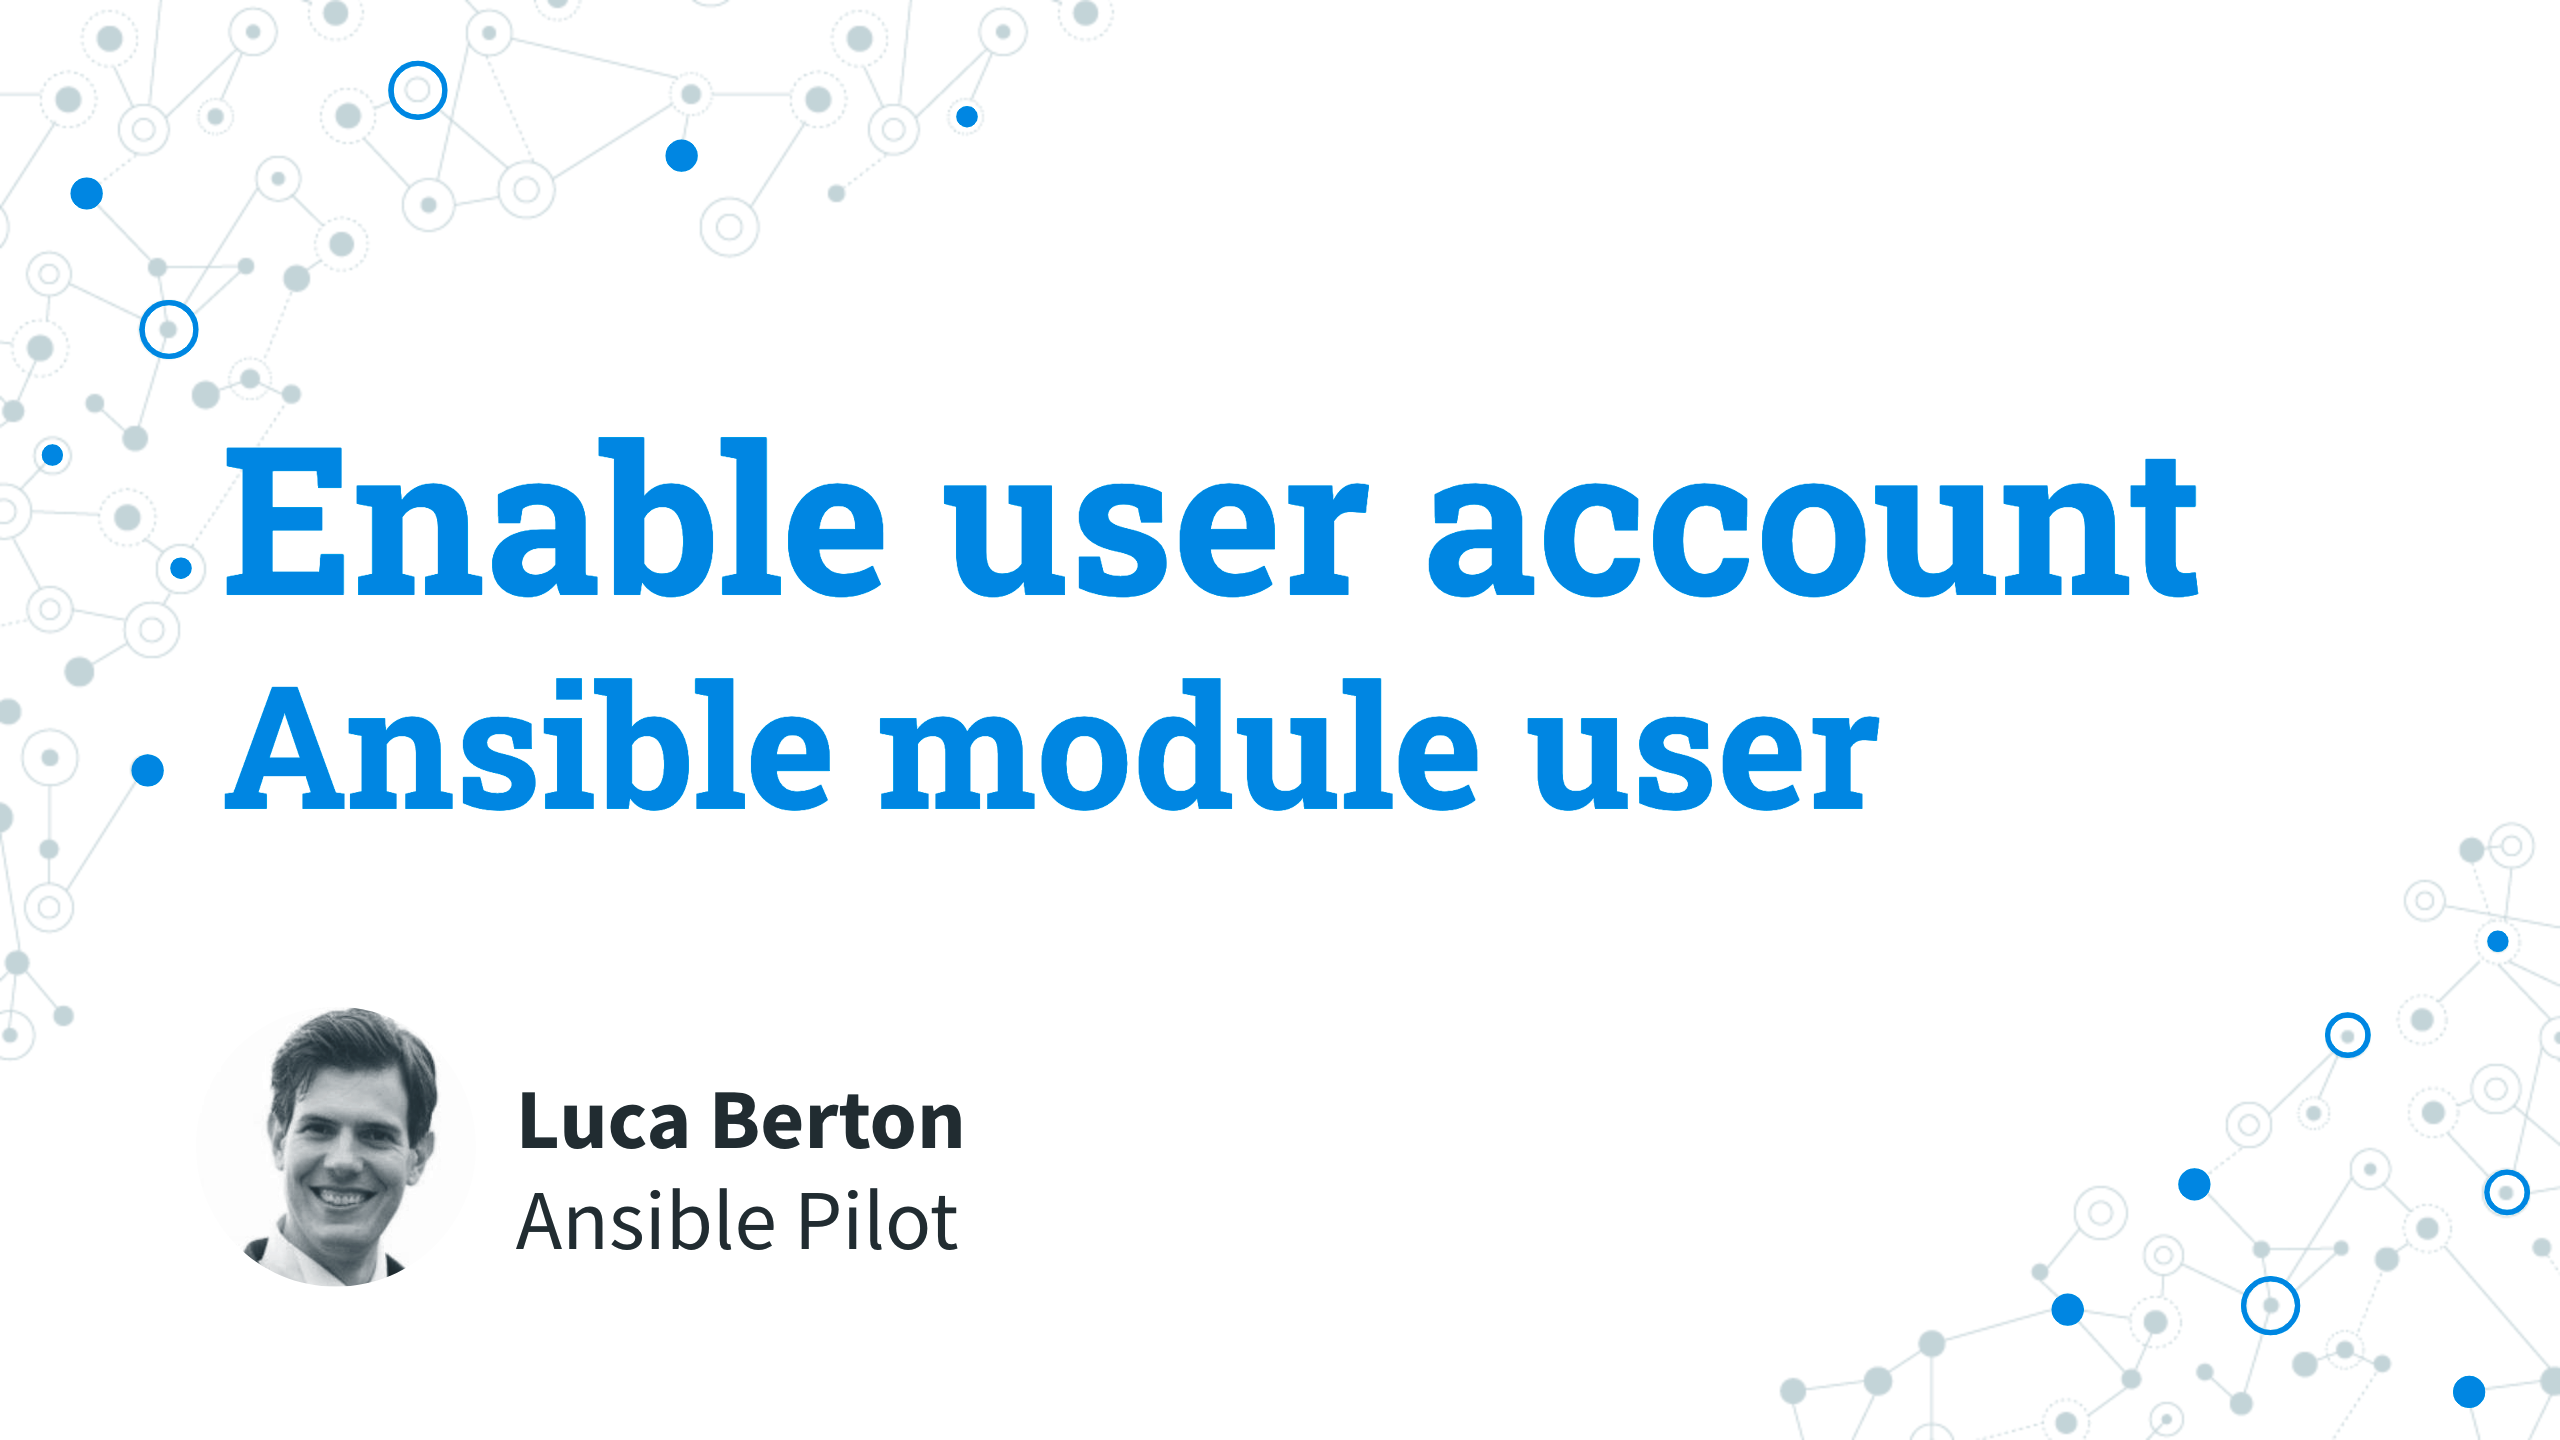 Enable user account - Ansible module user